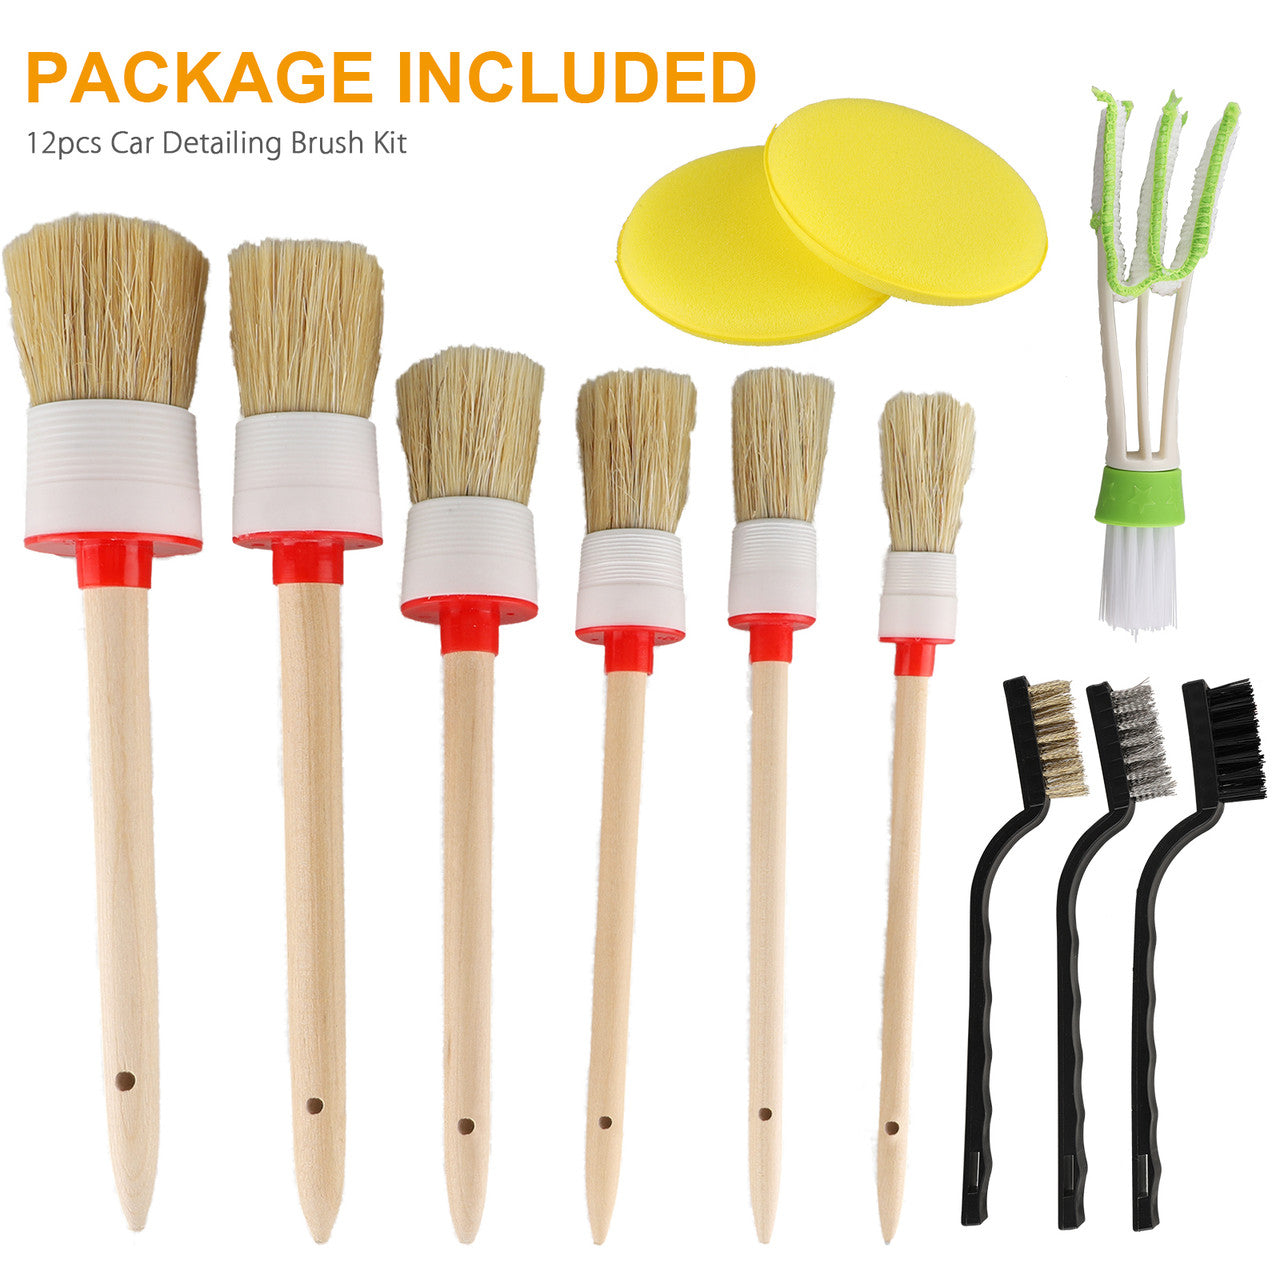 Auto Detailing Brush Set for Cleaning Wheels, Interior, Exterior, Leather, Car Cleaner Brush Set For Cleaning Engine, Wheel, Interior, Air Vent, Car, Motorcycle, 12Pcs